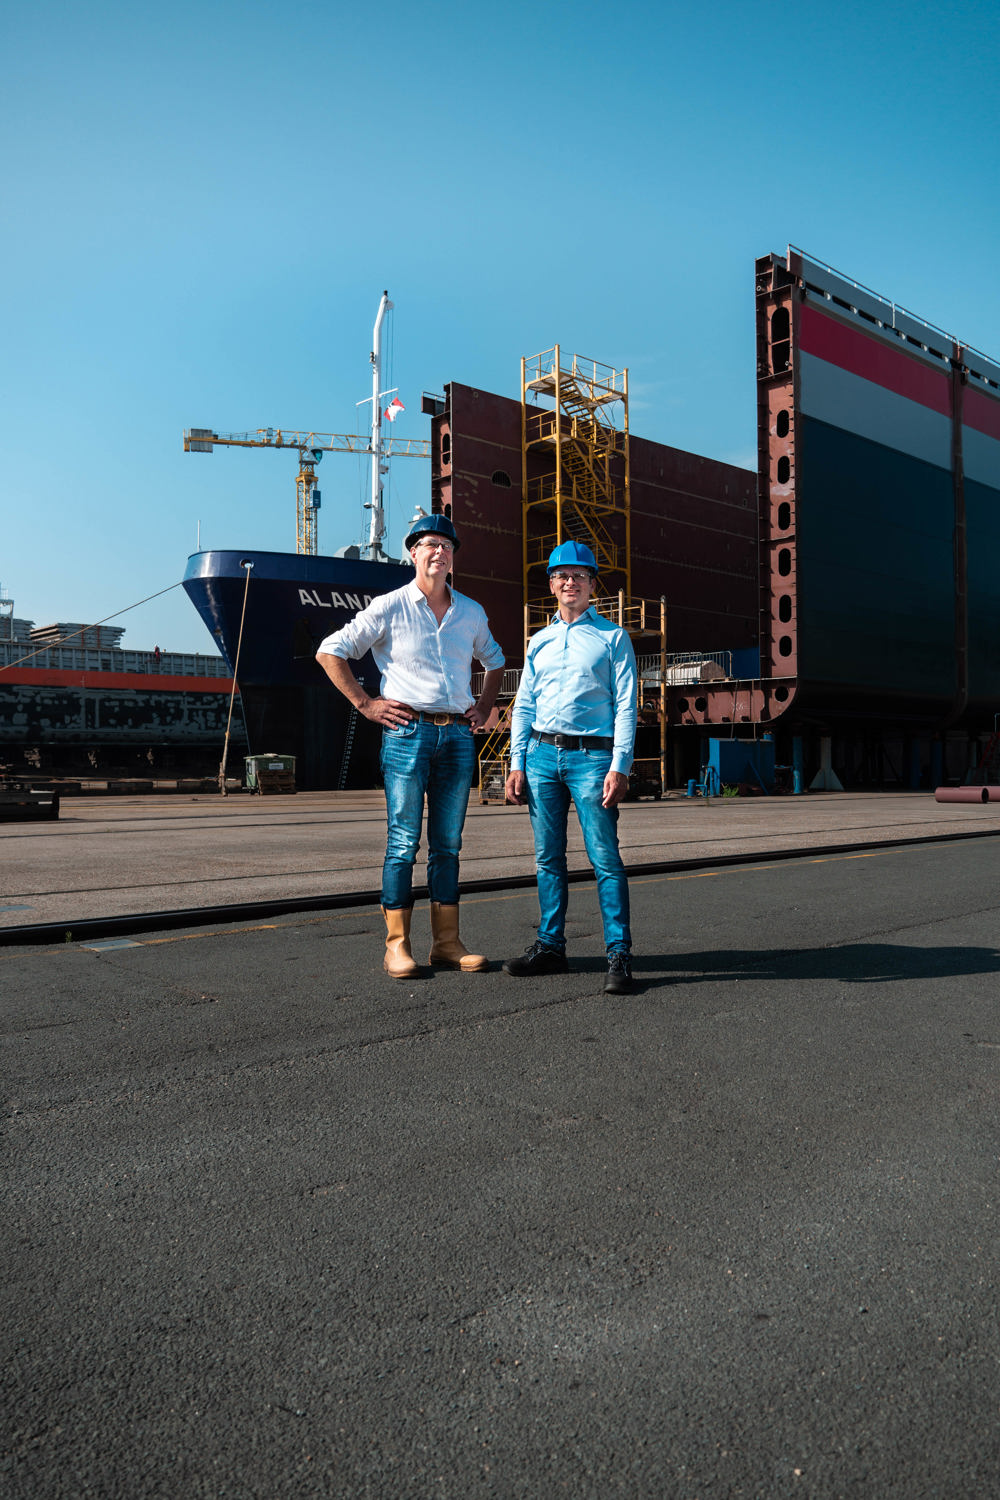 Haije Stigter (left) and Ludo van Hijfte offer companies the opportunity to drastically reduce their CO2 emissions within a few years.